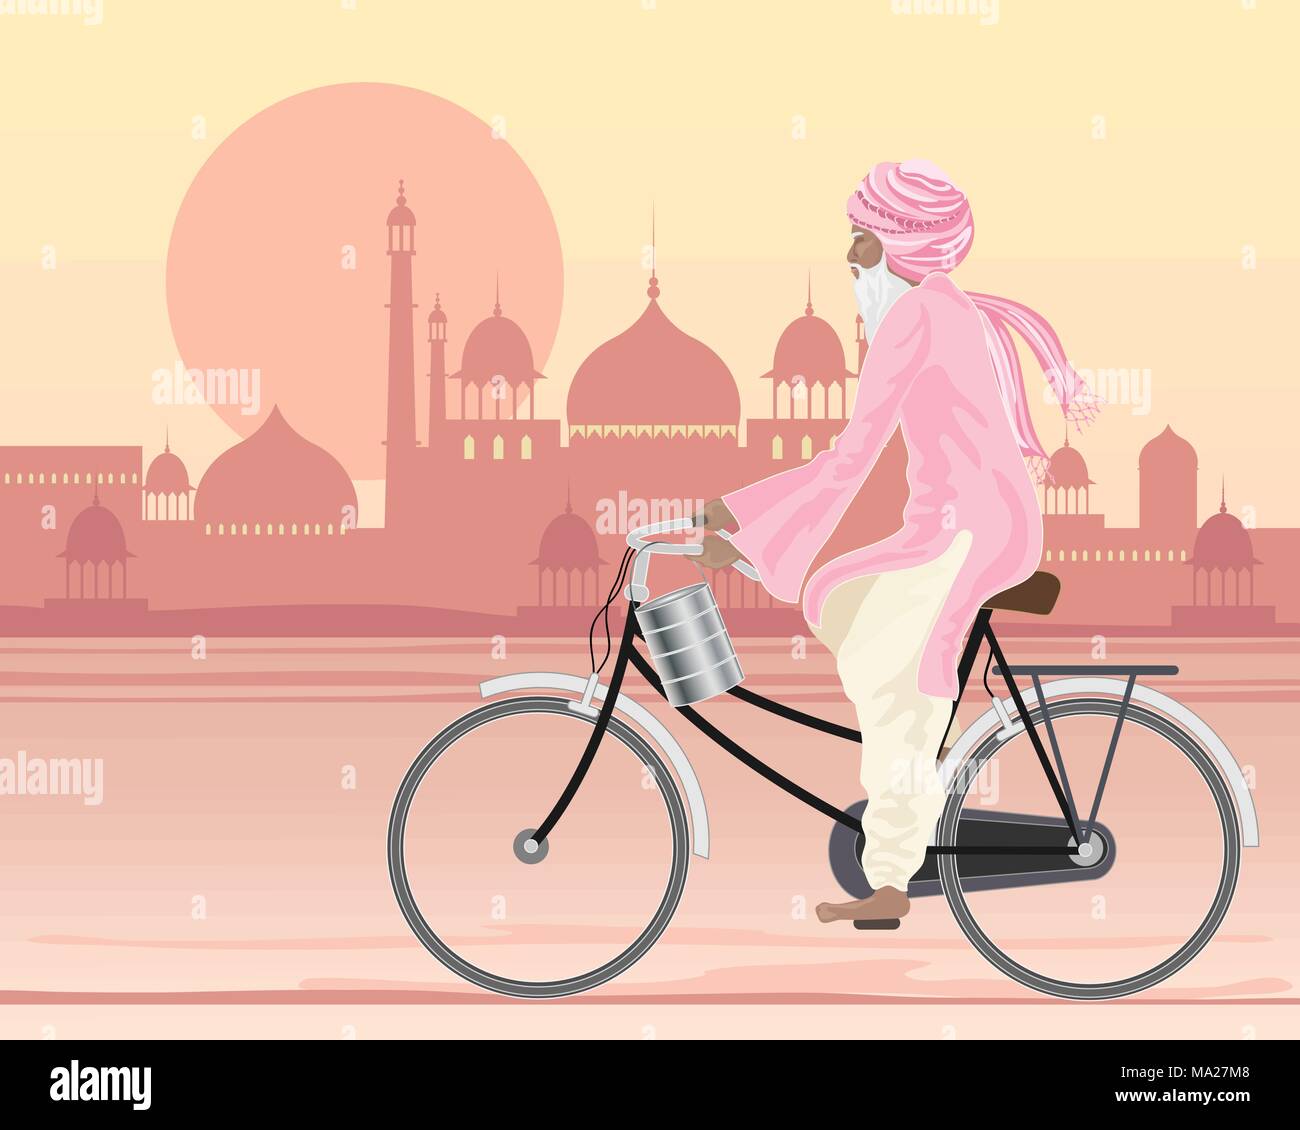 an illustration of a sikh man on a bicycle travelling along a hot city road at sunset in traditional dress with a tiffin and mughal architecture in th Stock Vector